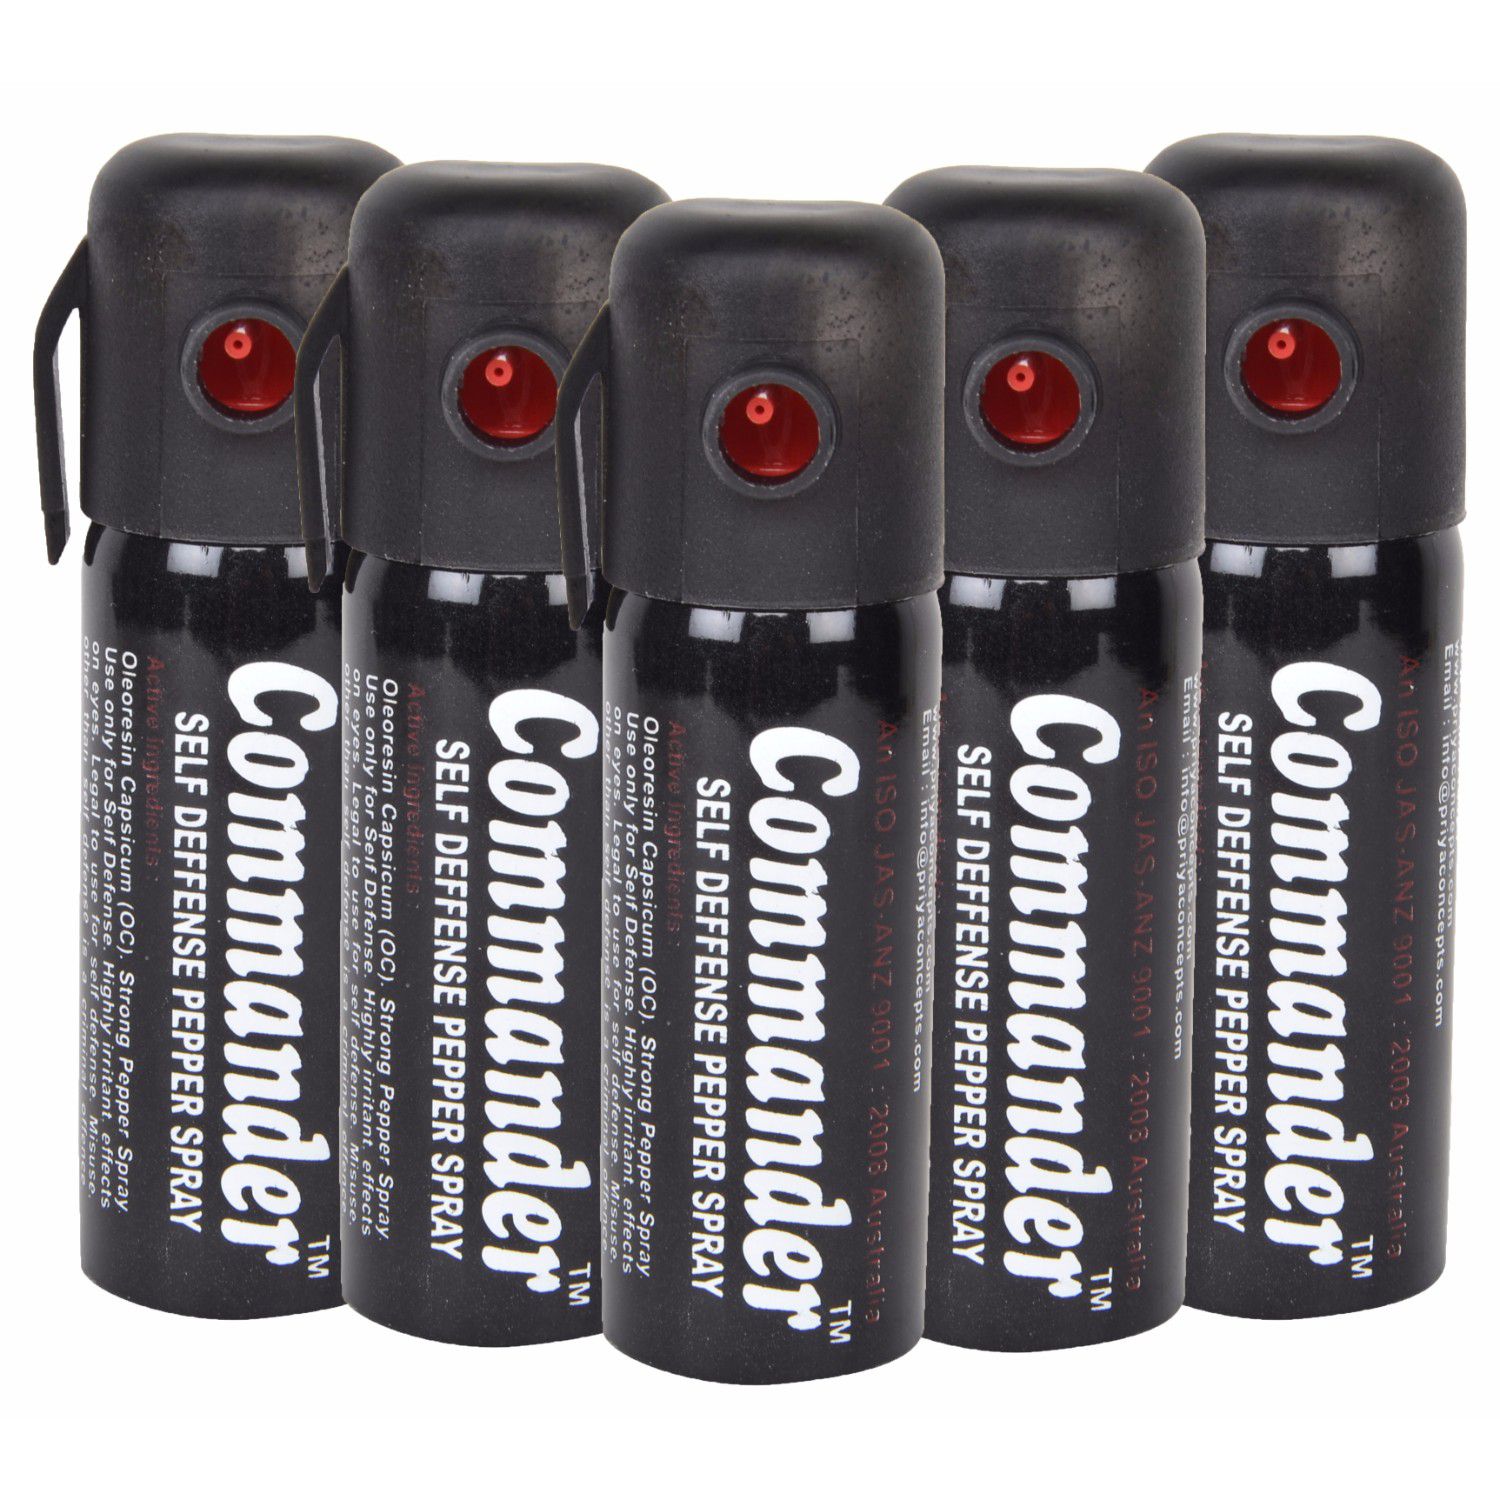 Commander Self Defence Women Safety up to 10 Feet Range Pepper Spray I 35gm (Pack of 5)